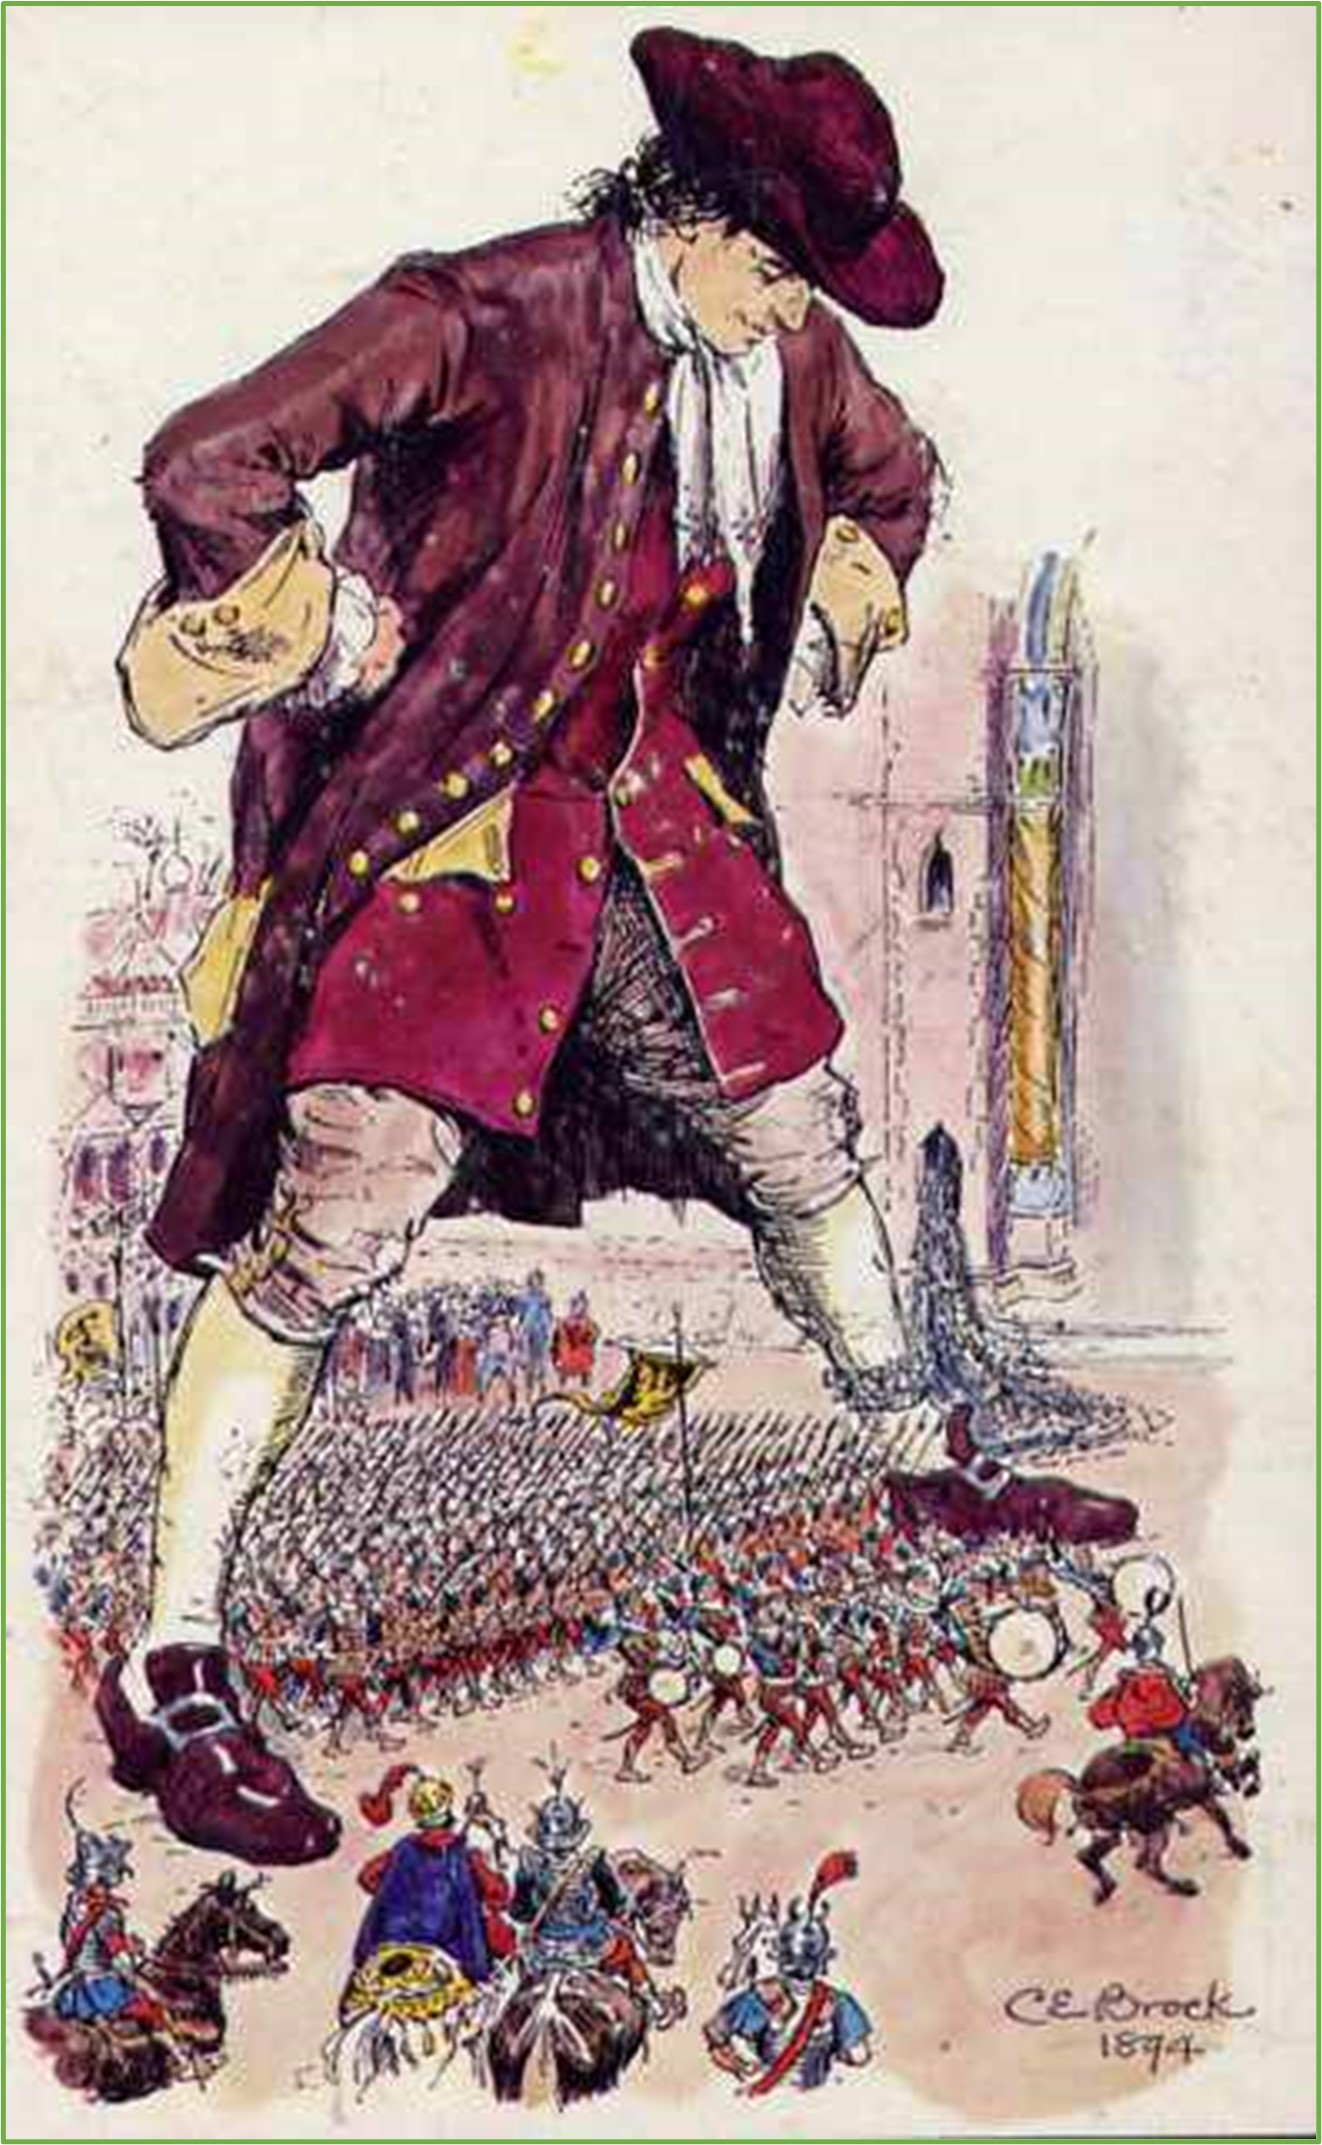 Drawing of Gulliver, image of giant man towering over tiny crowd of people